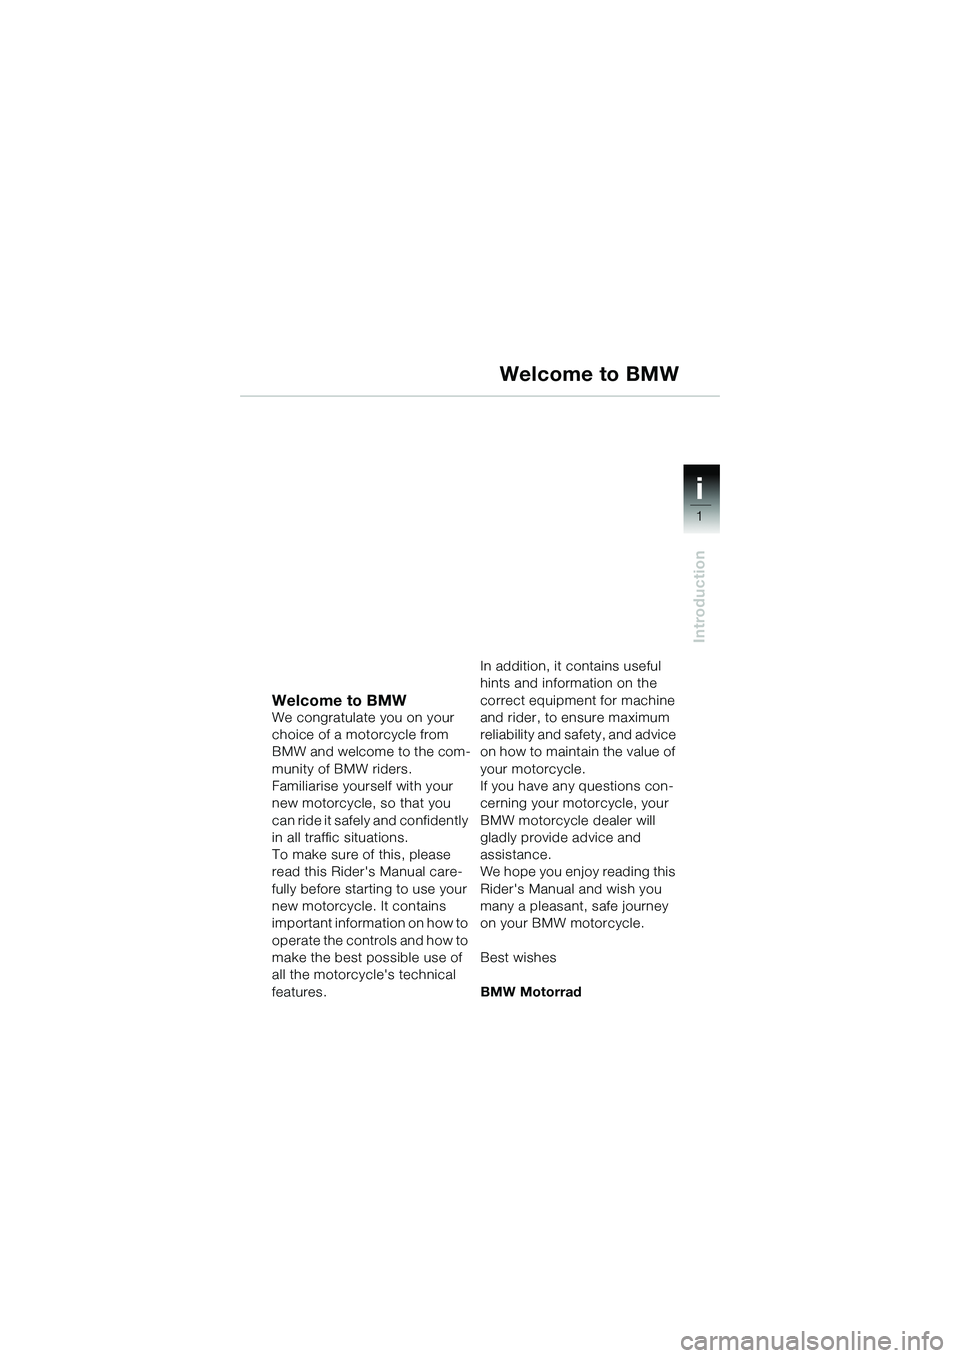 BMW MOTORRAD R 1150 R 2002  Riders Manual (in English) 1
Introduction
i
Welcome to BMWWe congratulate you on your 
choice of a motorcycle from 
BMW and welcome to the com-
munity of BMW riders.
Familiarise yourself with your 
new motorcycle, so that you 
